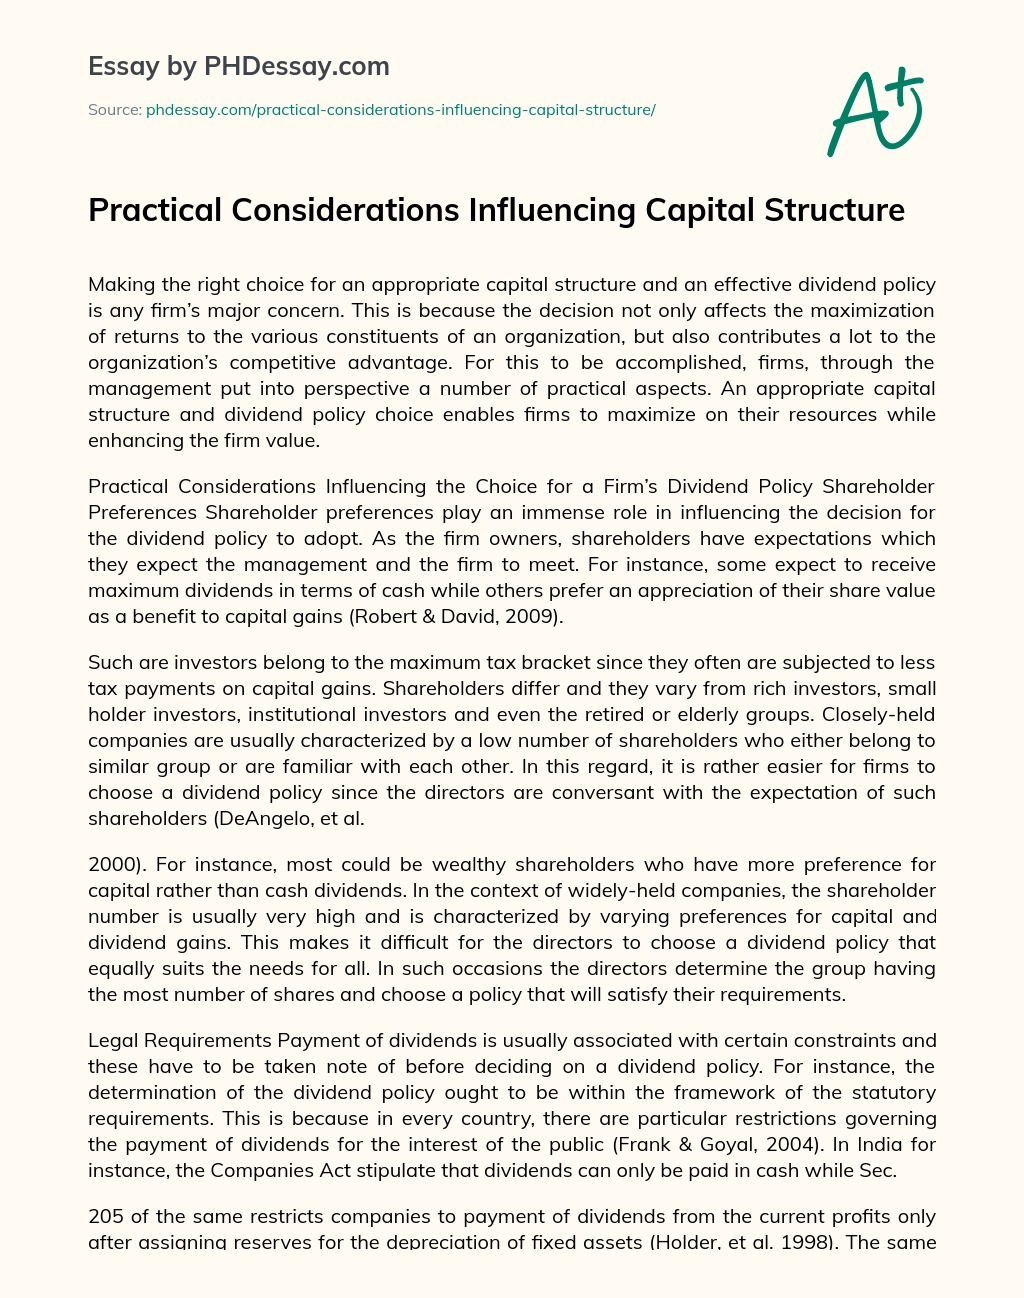 Practical Considerations Influencing Capital Structure essay